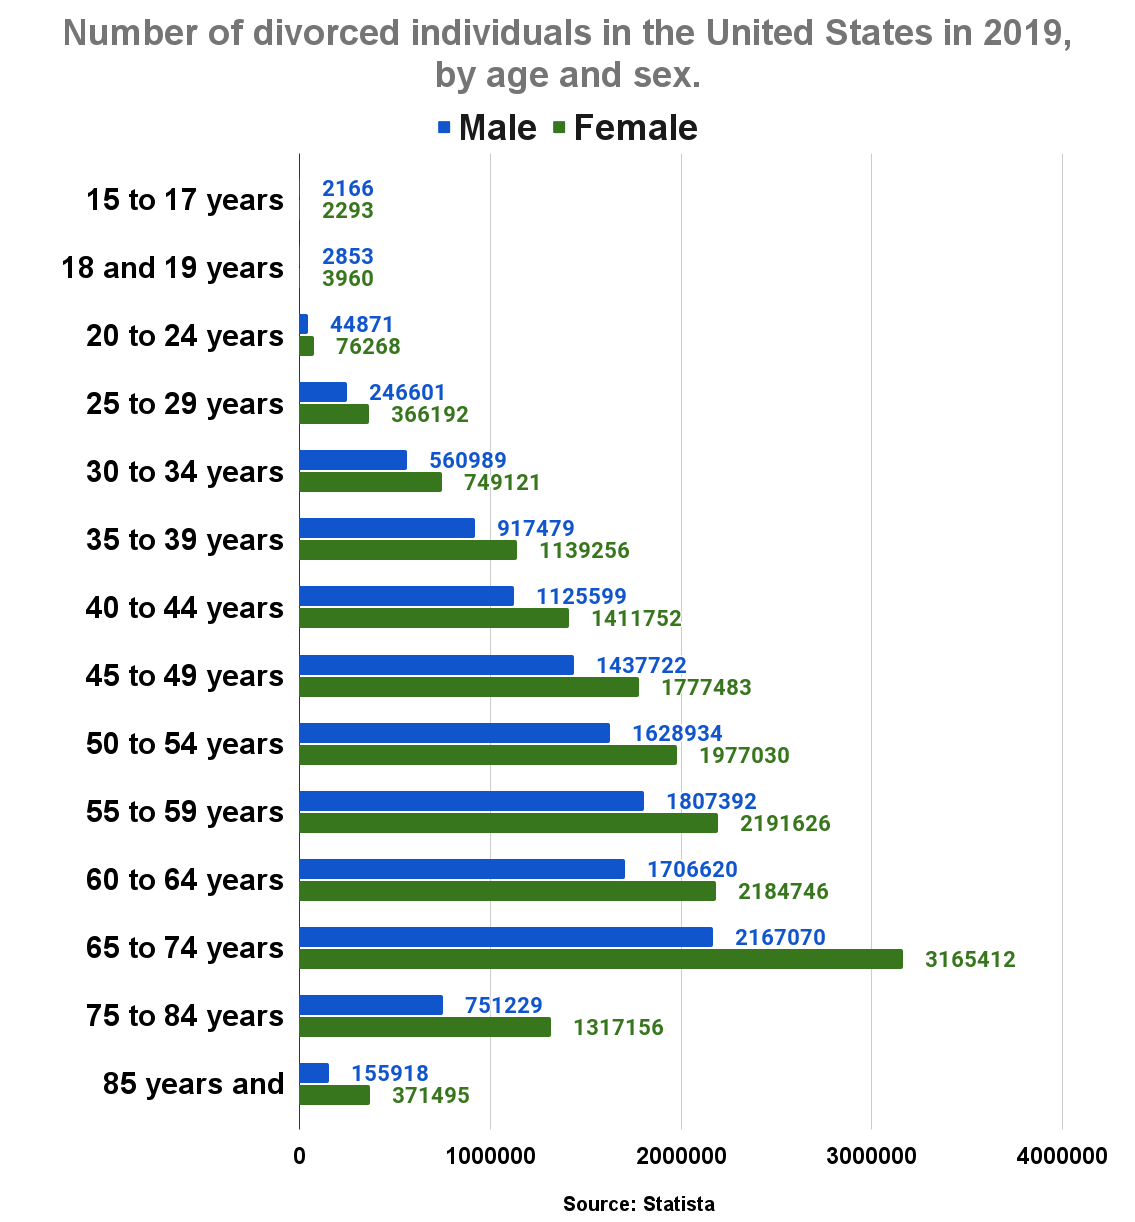 Number of divorced individuals in the United States in 2019, by age and sex.